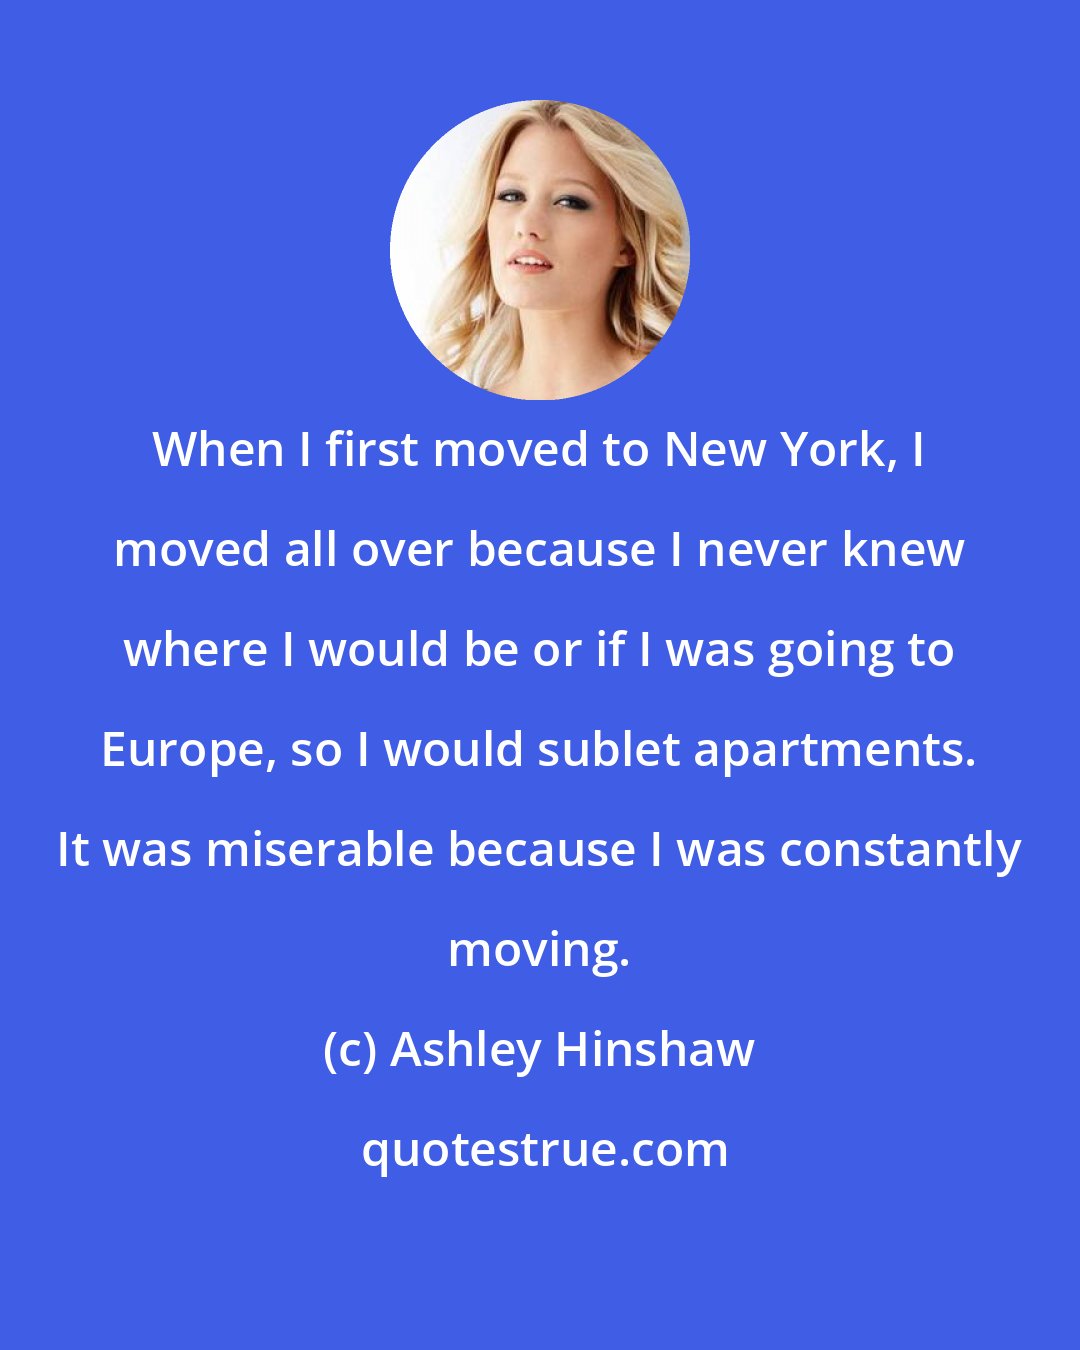 Ashley Hinshaw: When I first moved to New York, I moved all over because I never knew where I would be or if I was going to Europe, so I would sublet apartments. It was miserable because I was constantly moving.